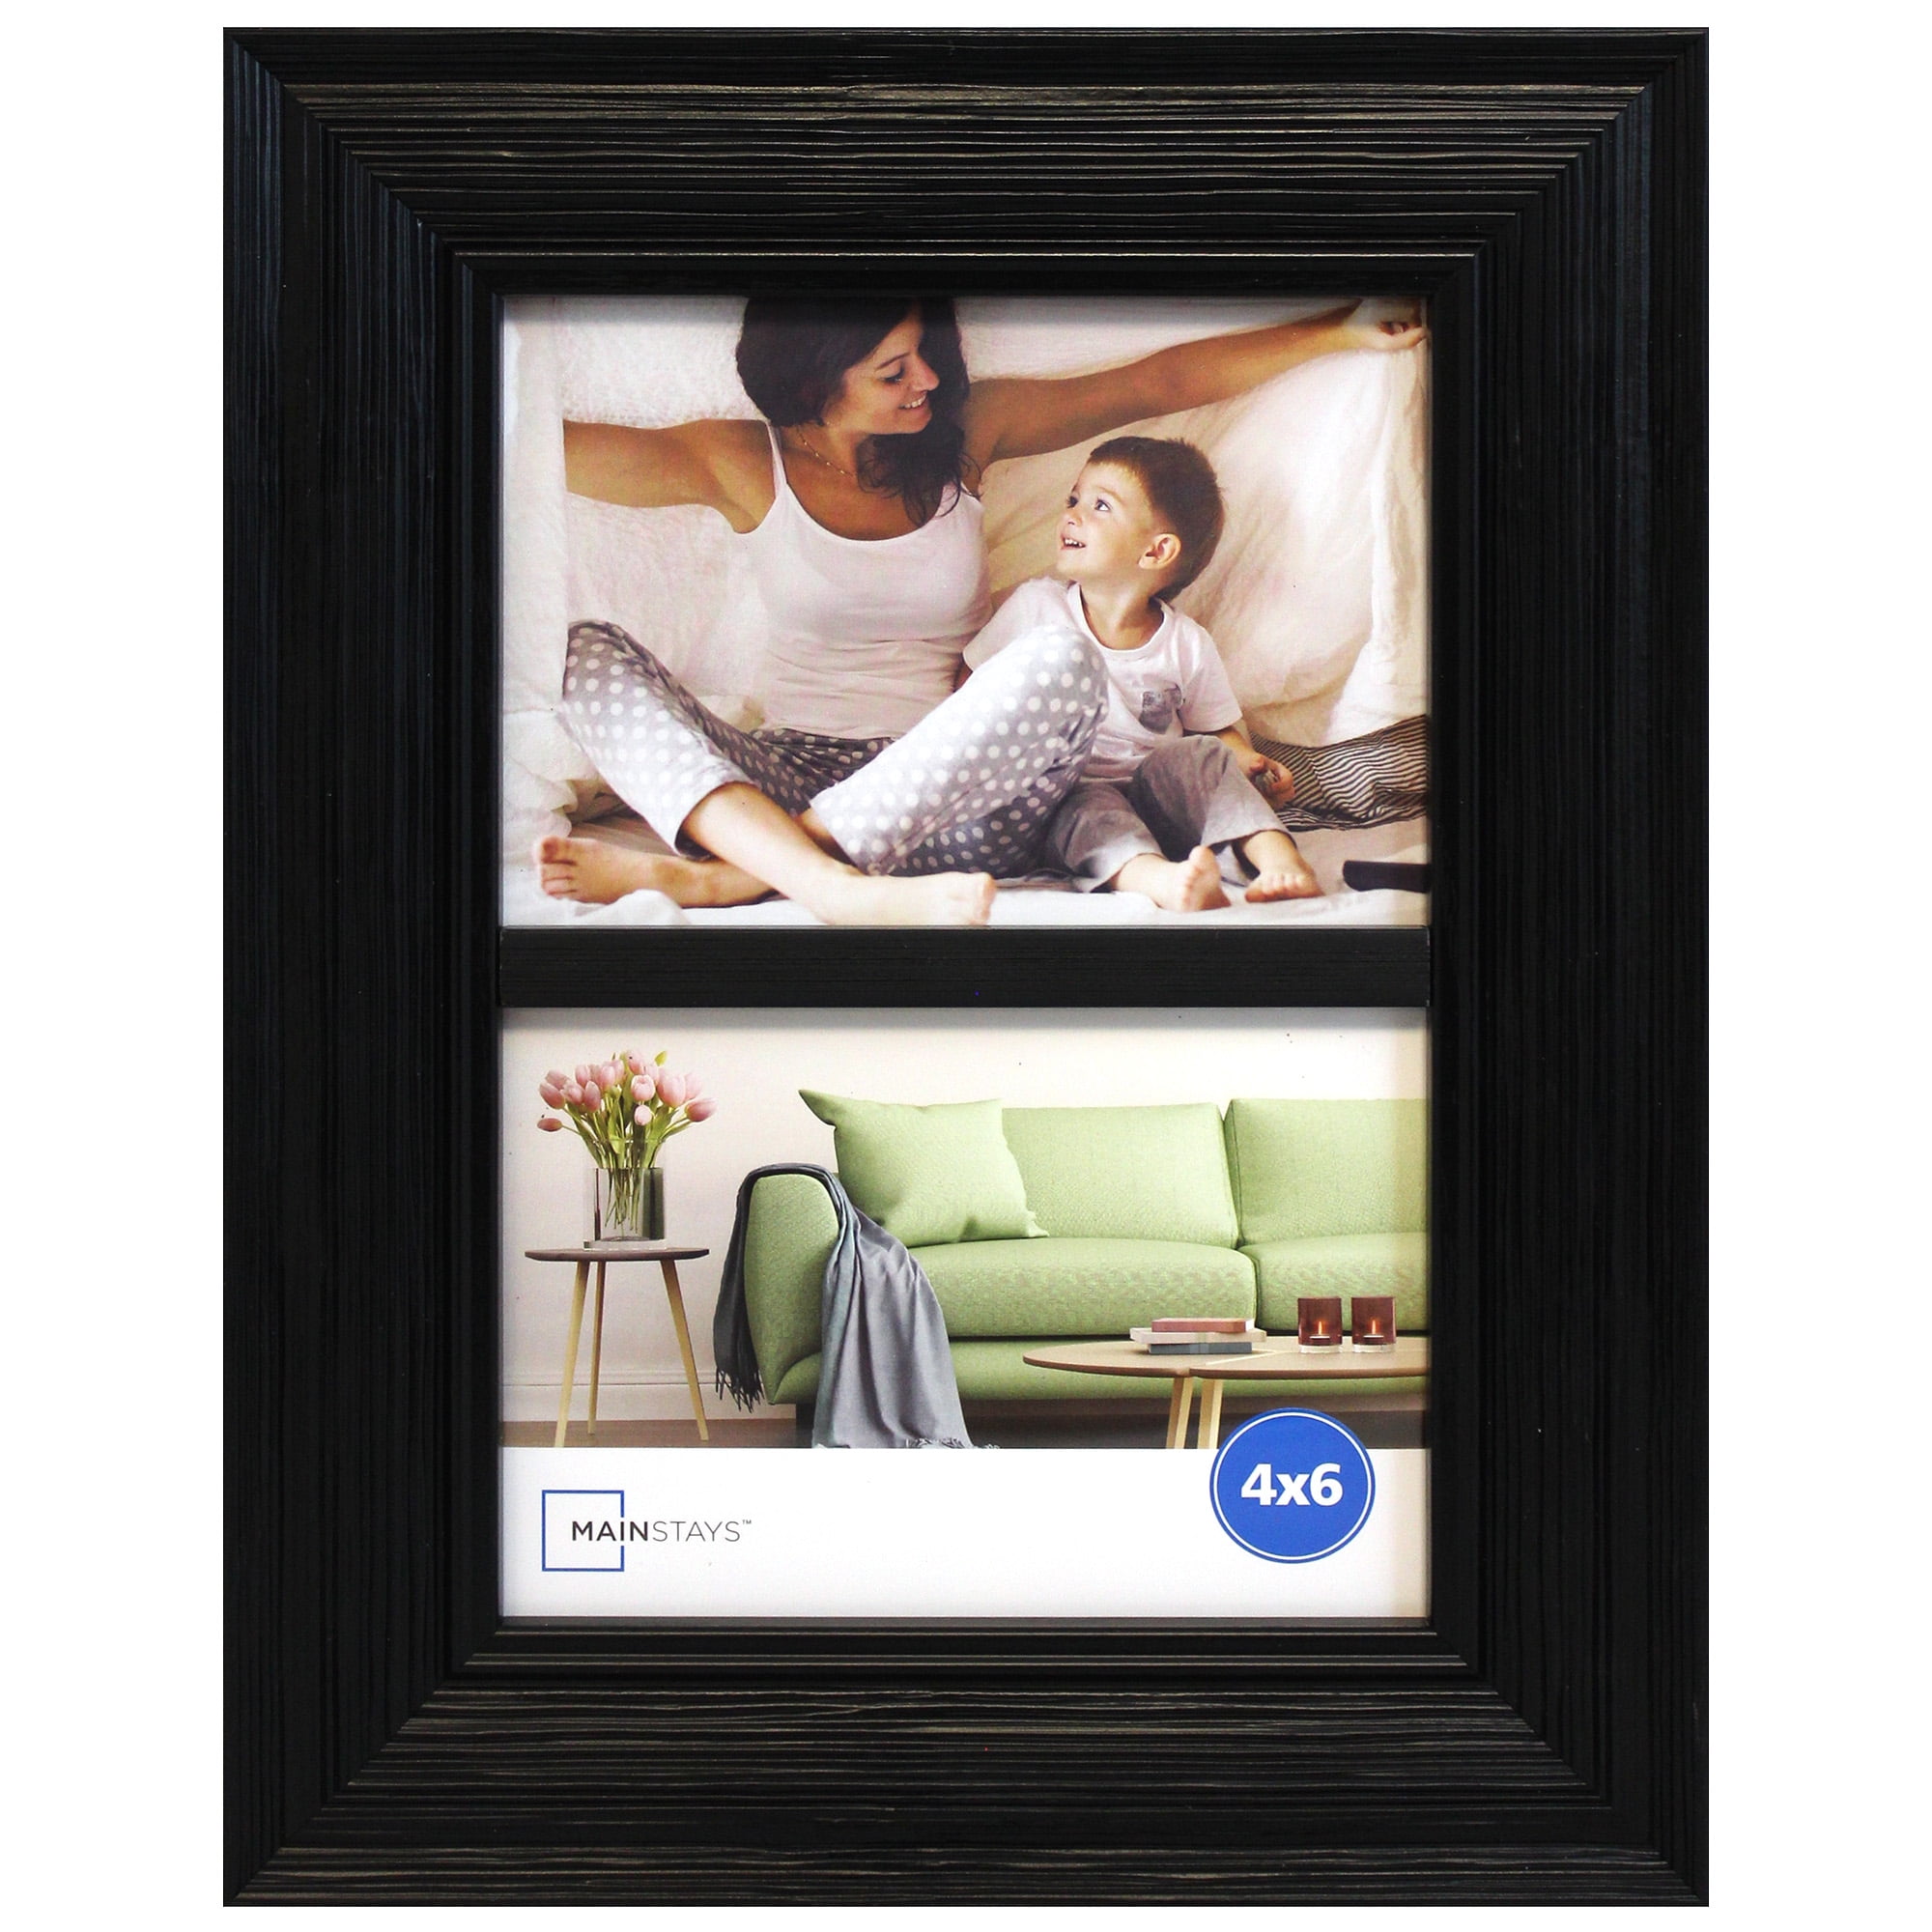 Spepla 4x6 Picture Frame Set of 2, Black Metal Frames Fits 4 by 6 Inch Photo